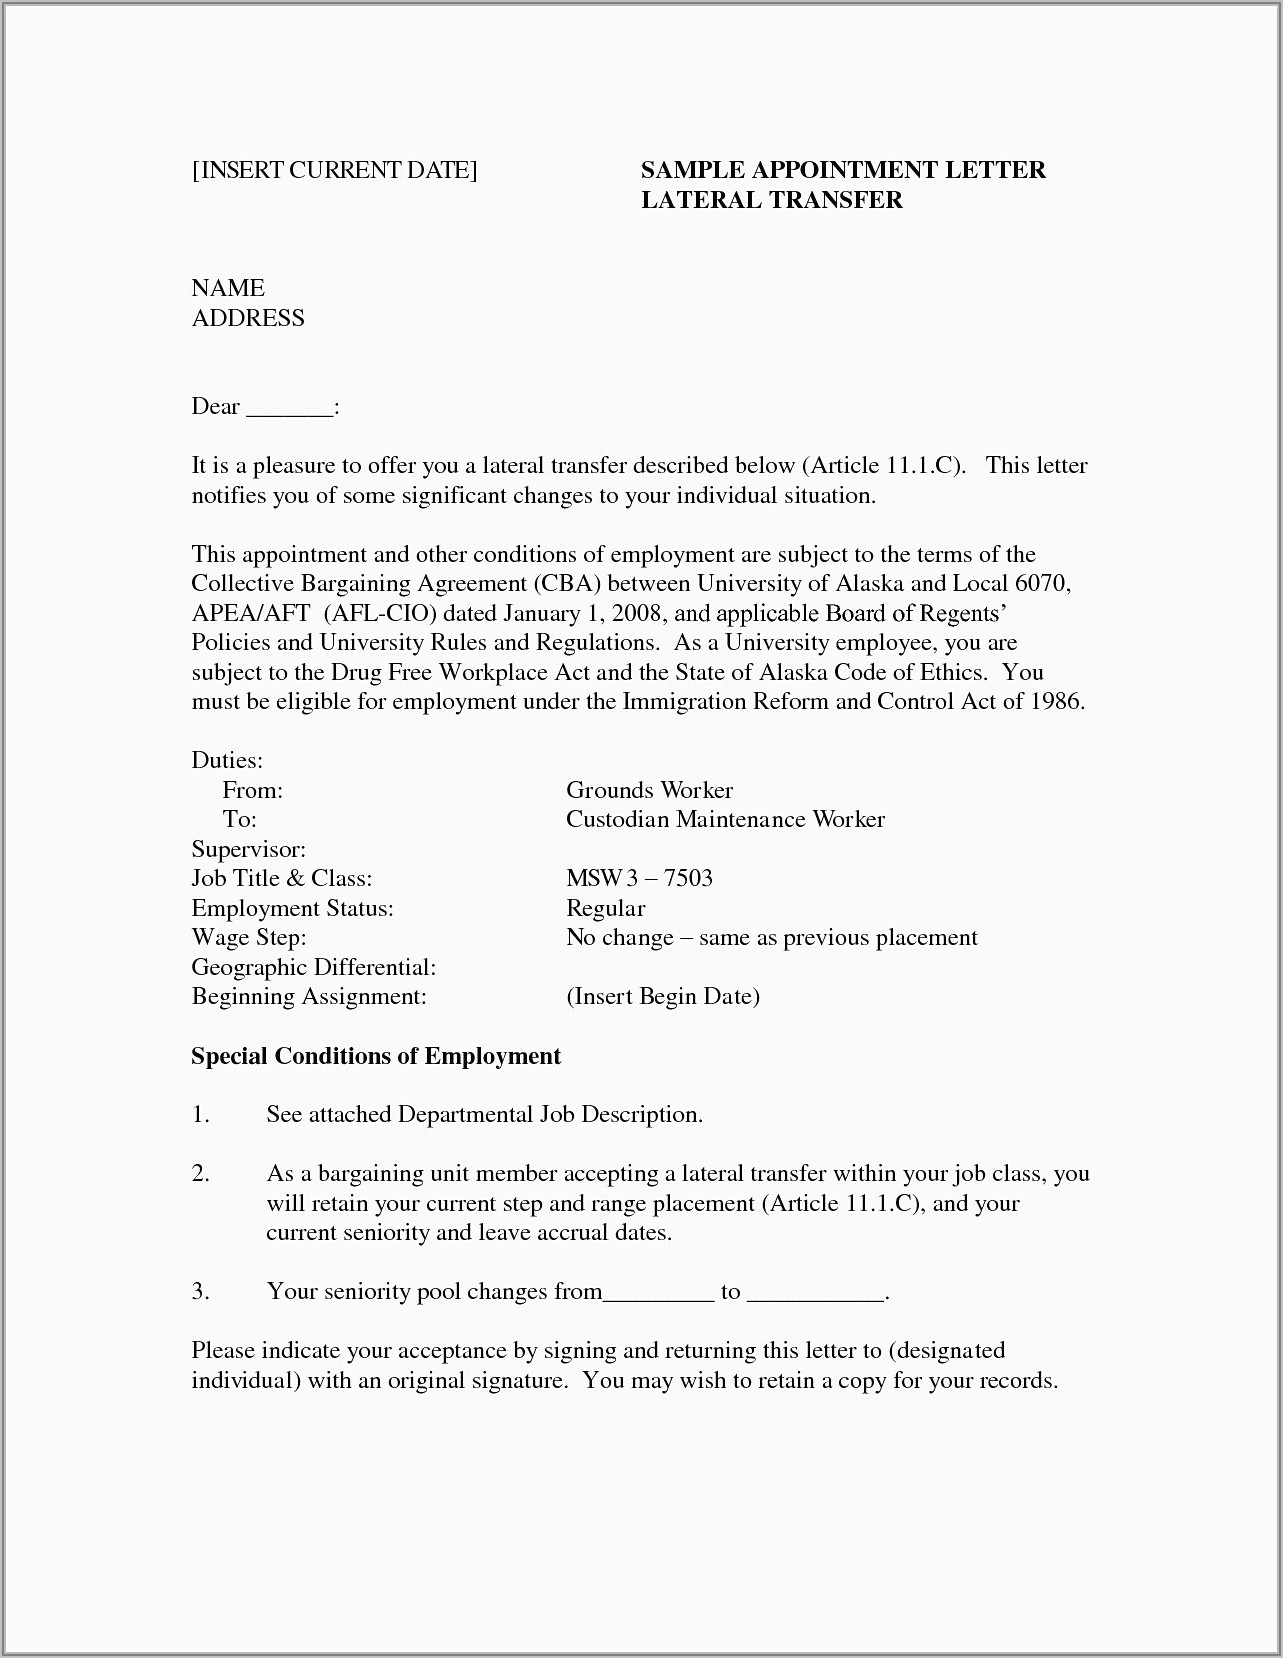 Best Free Resume And Cover Letter Builder